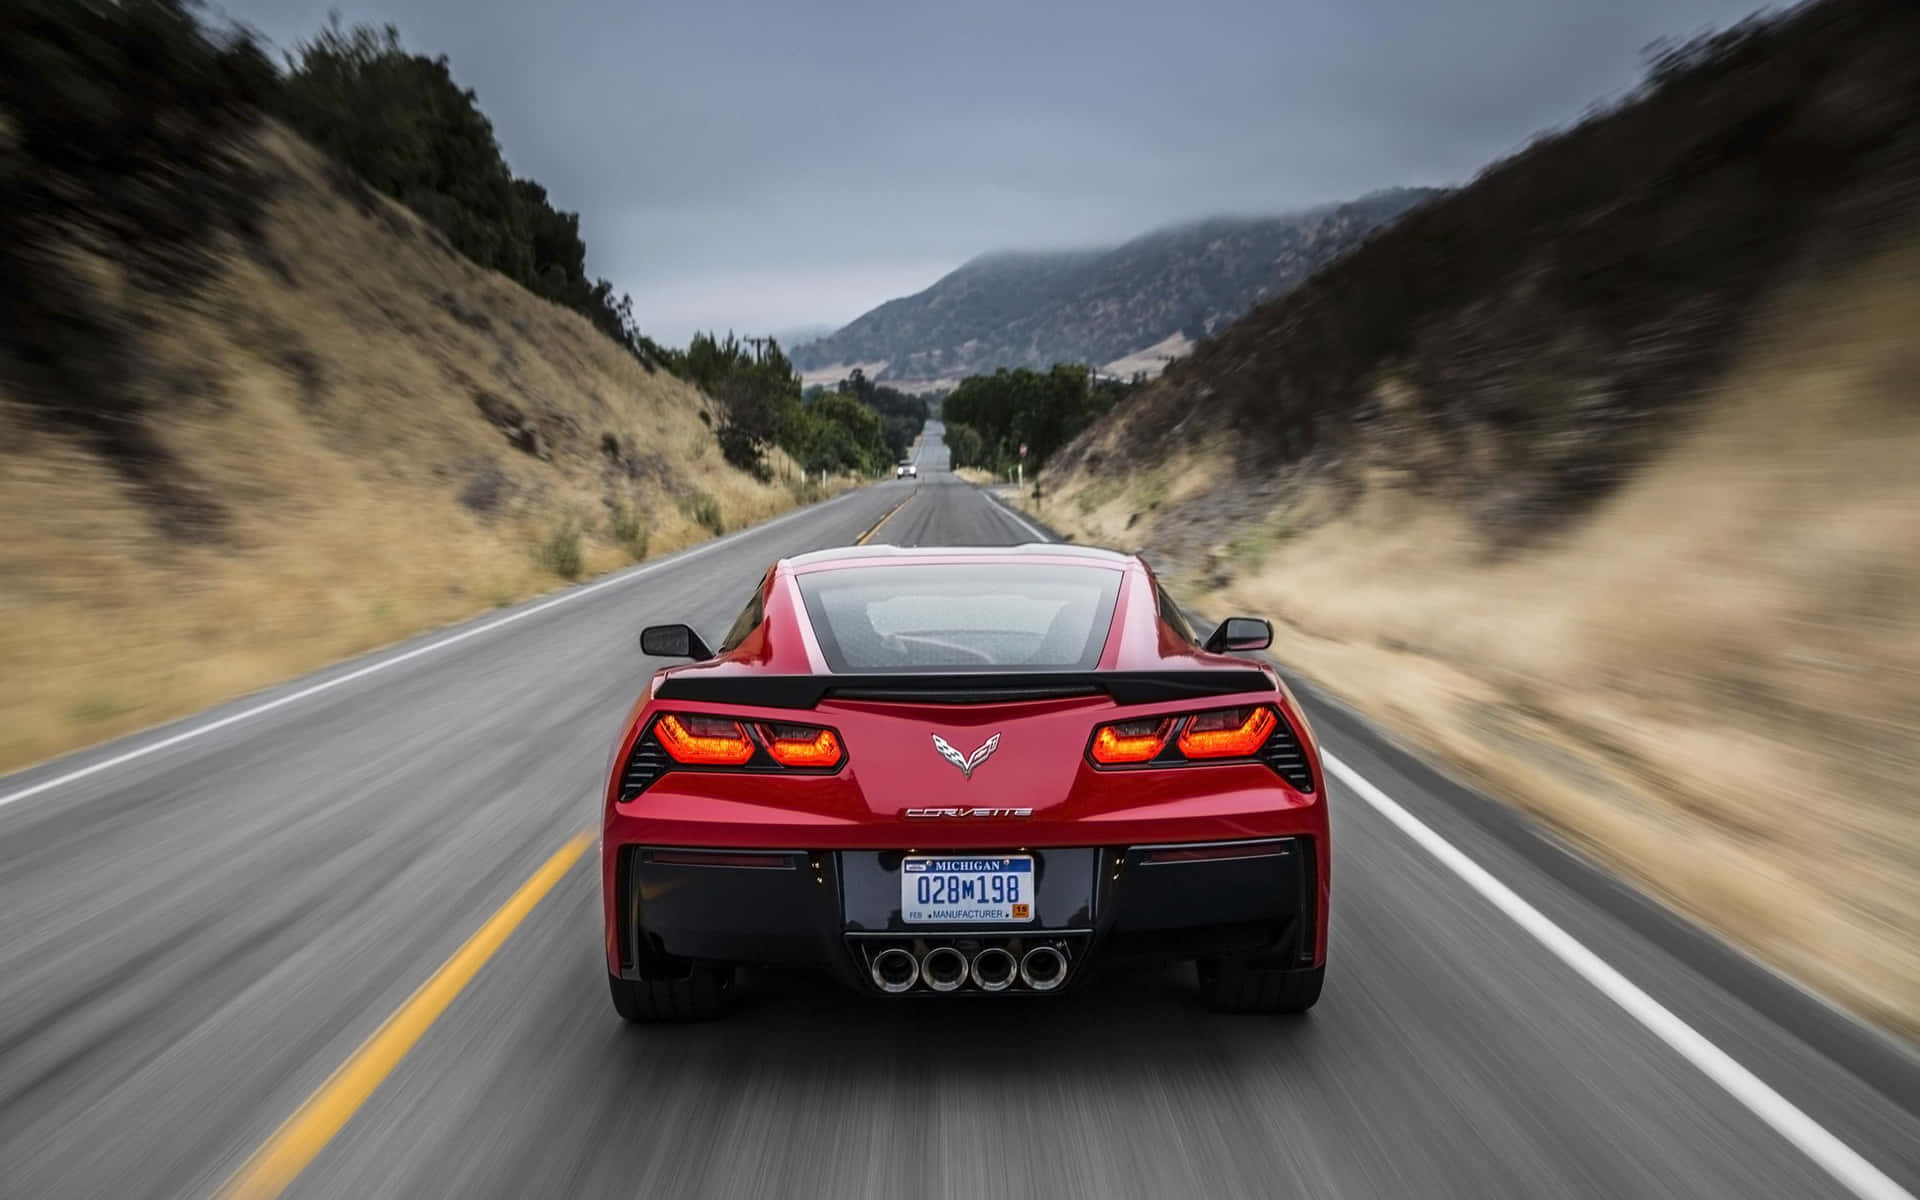 Enjoy the open road in this stylish Chevrolet Corvette